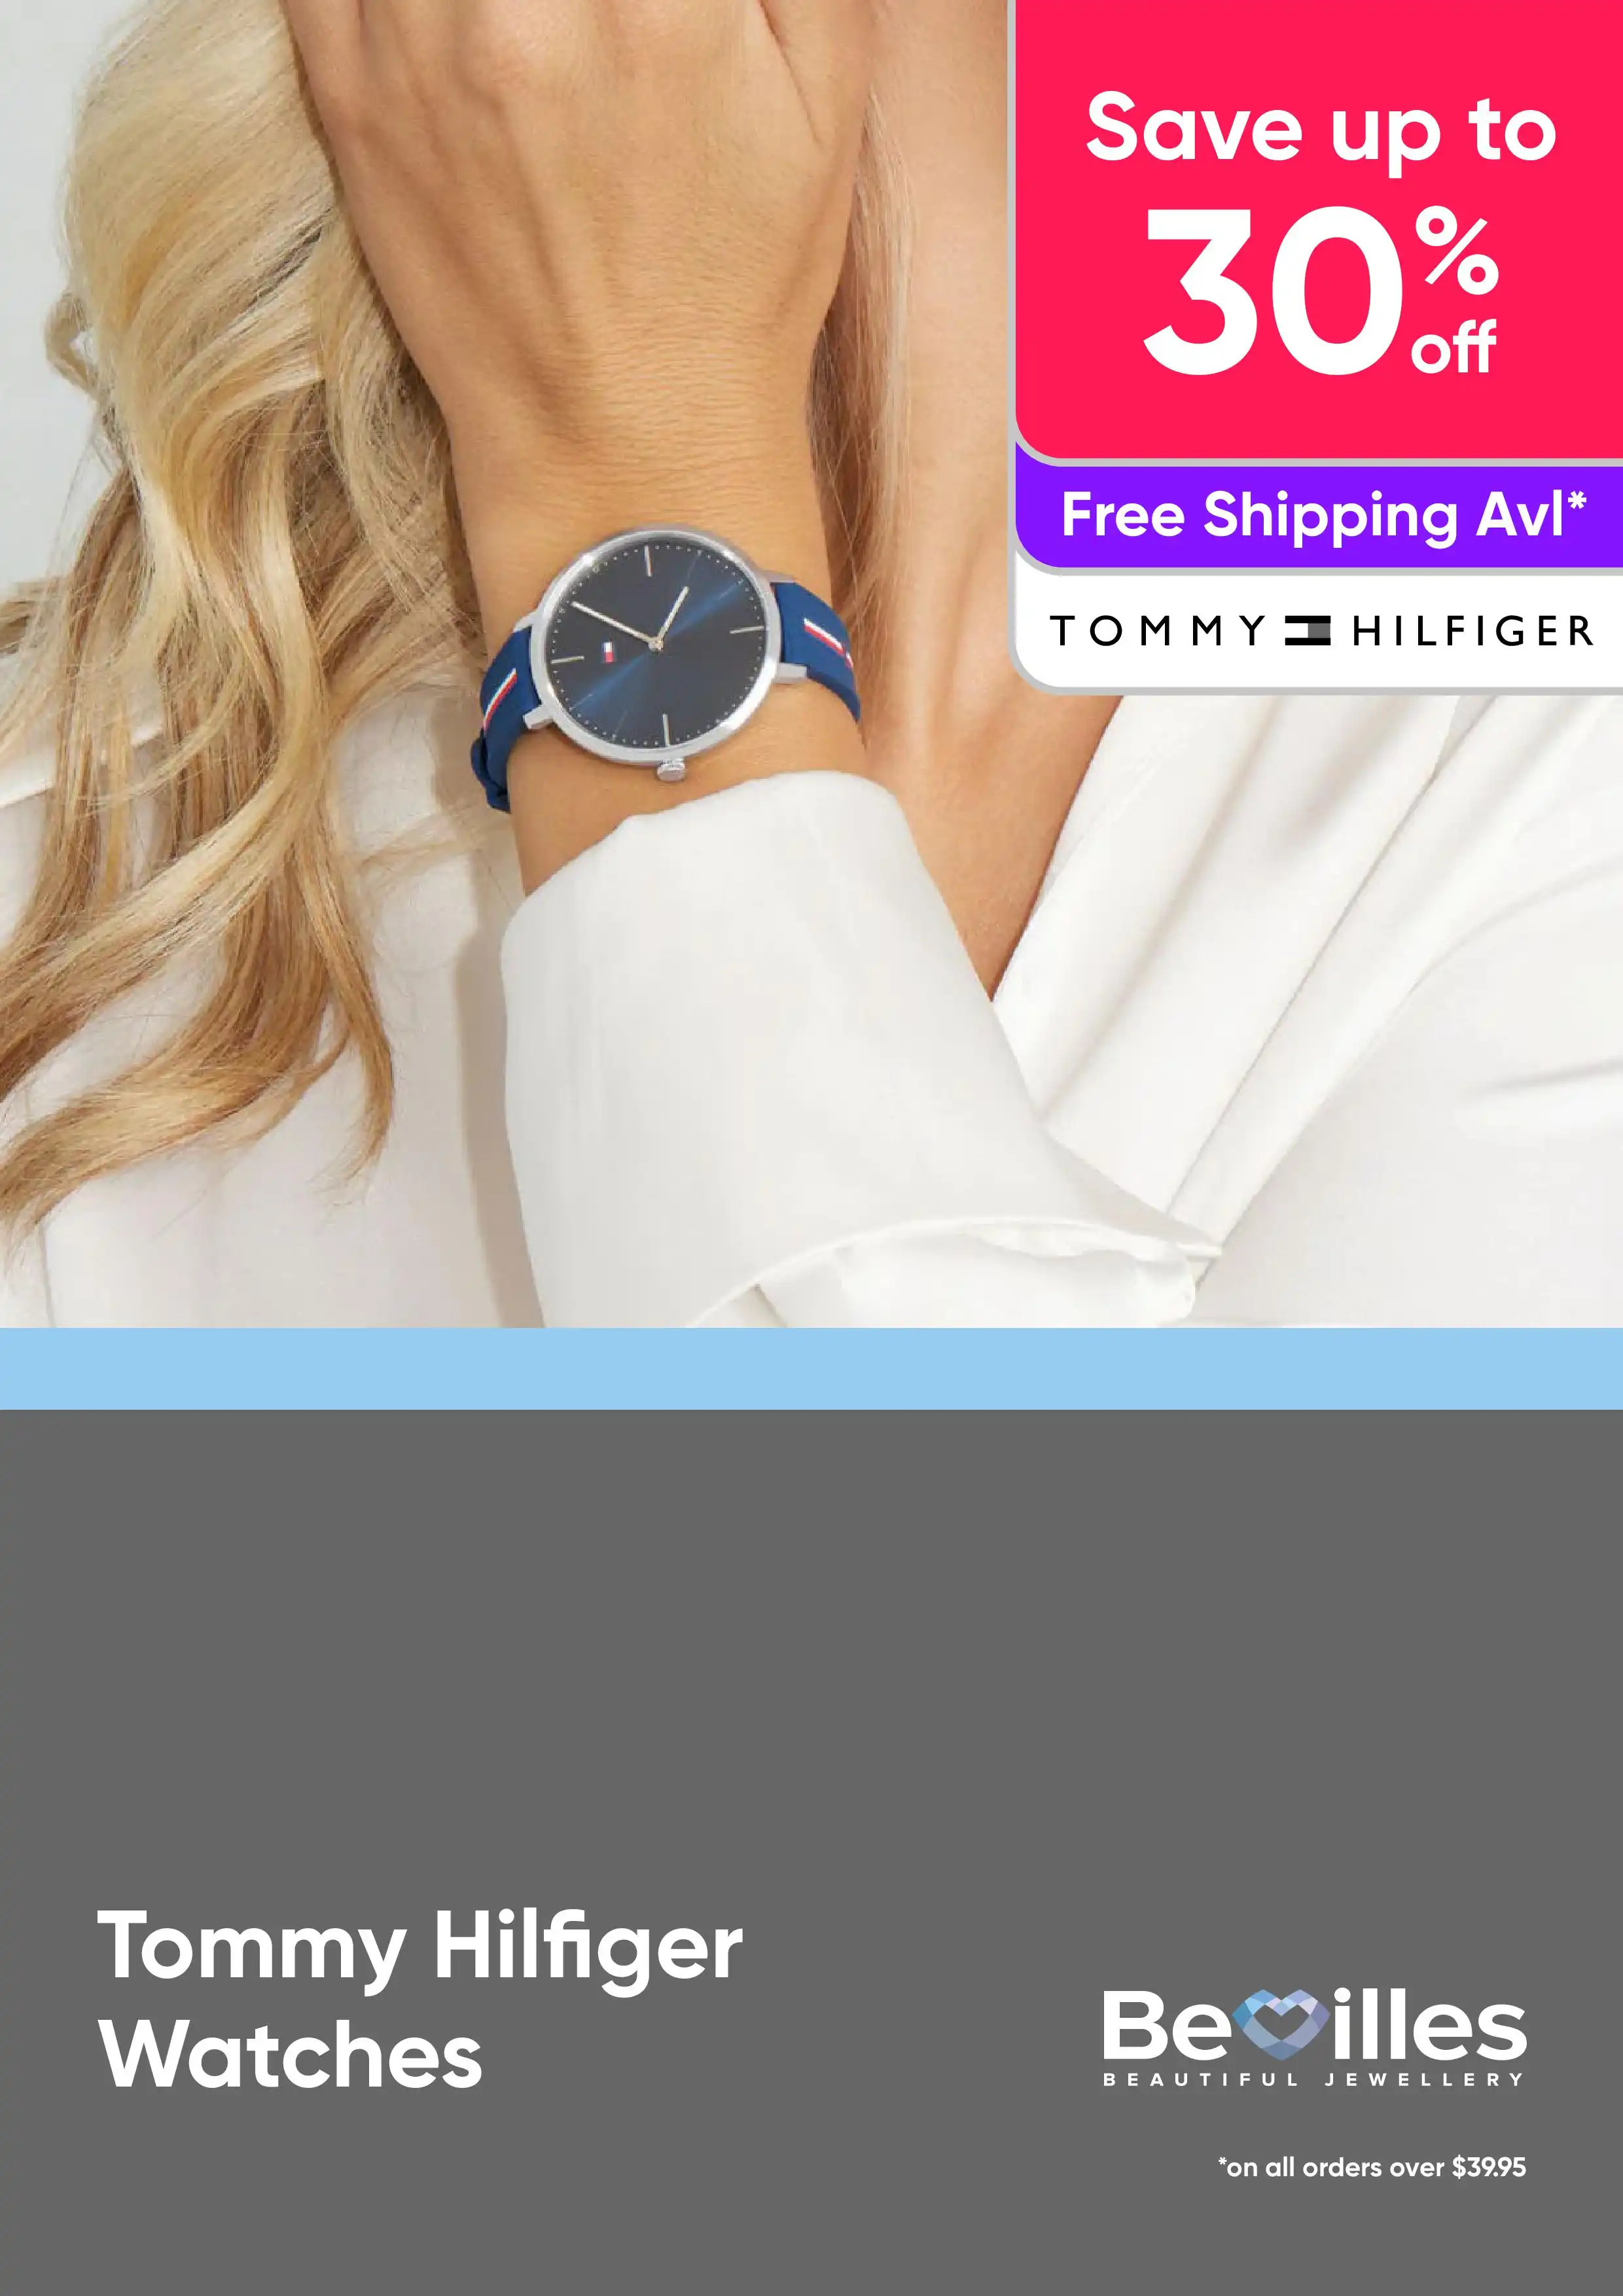 Tommy Hilfiger Watch Sale – up to 30% off